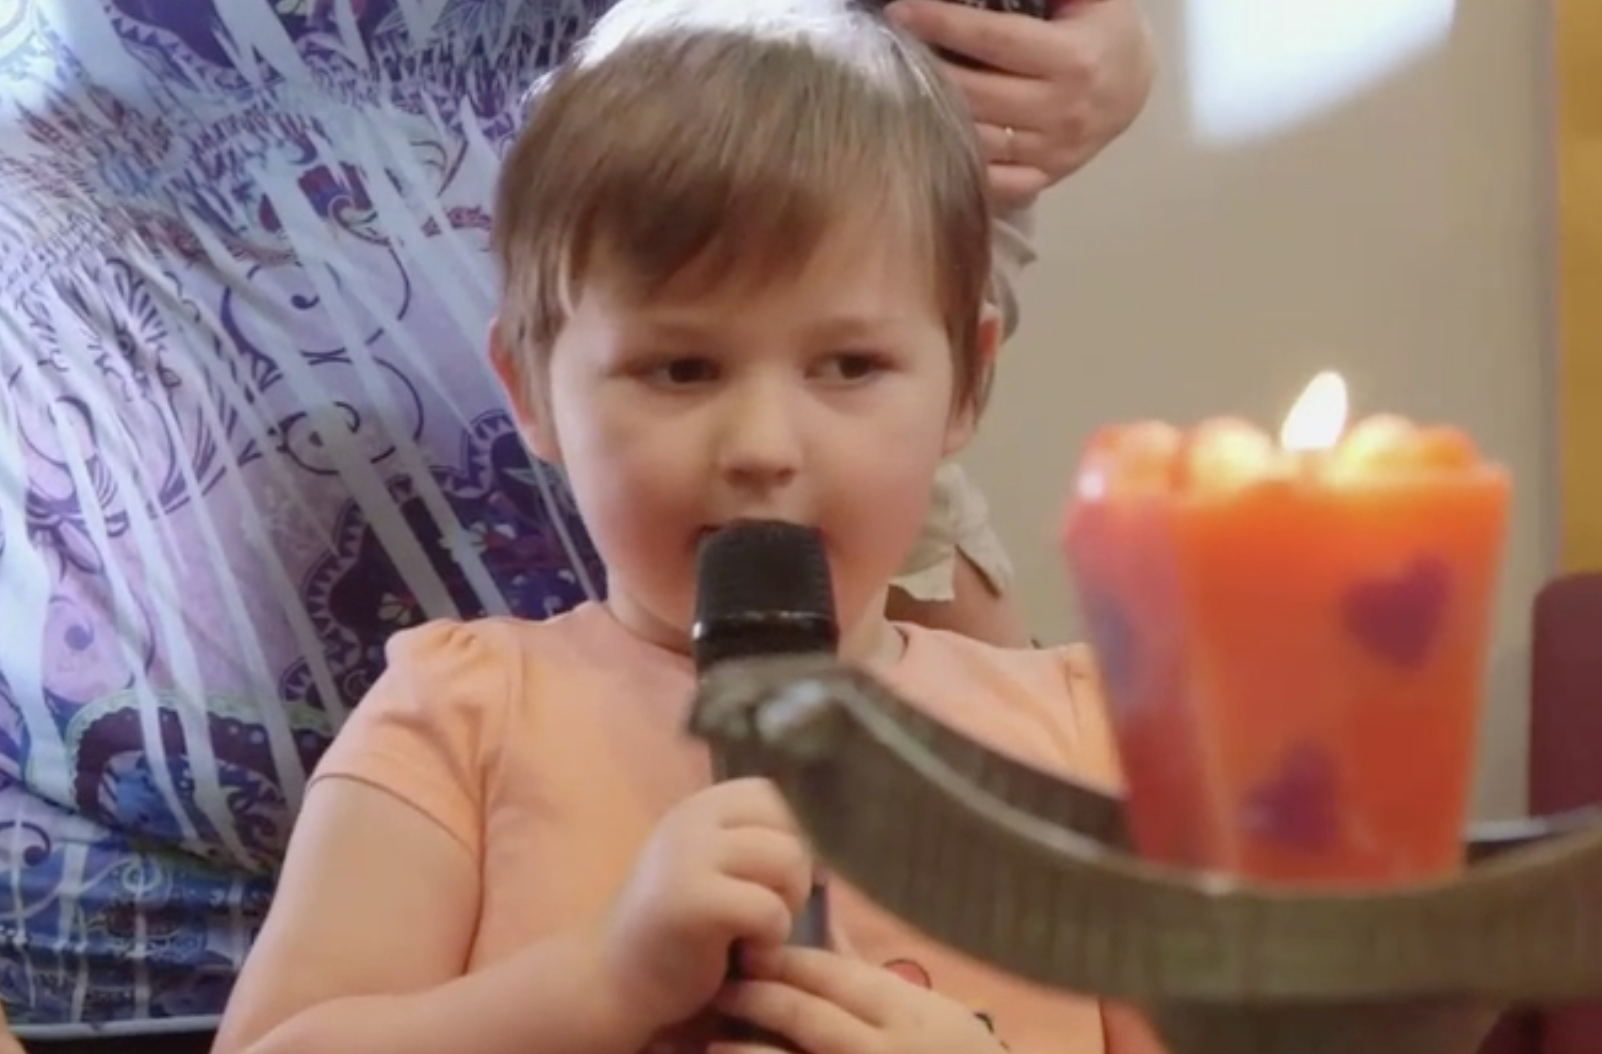 ‘Child Abuse’: Conservatives ‘#BoycottHBO’ After New Series Promotes Trans Toddlers